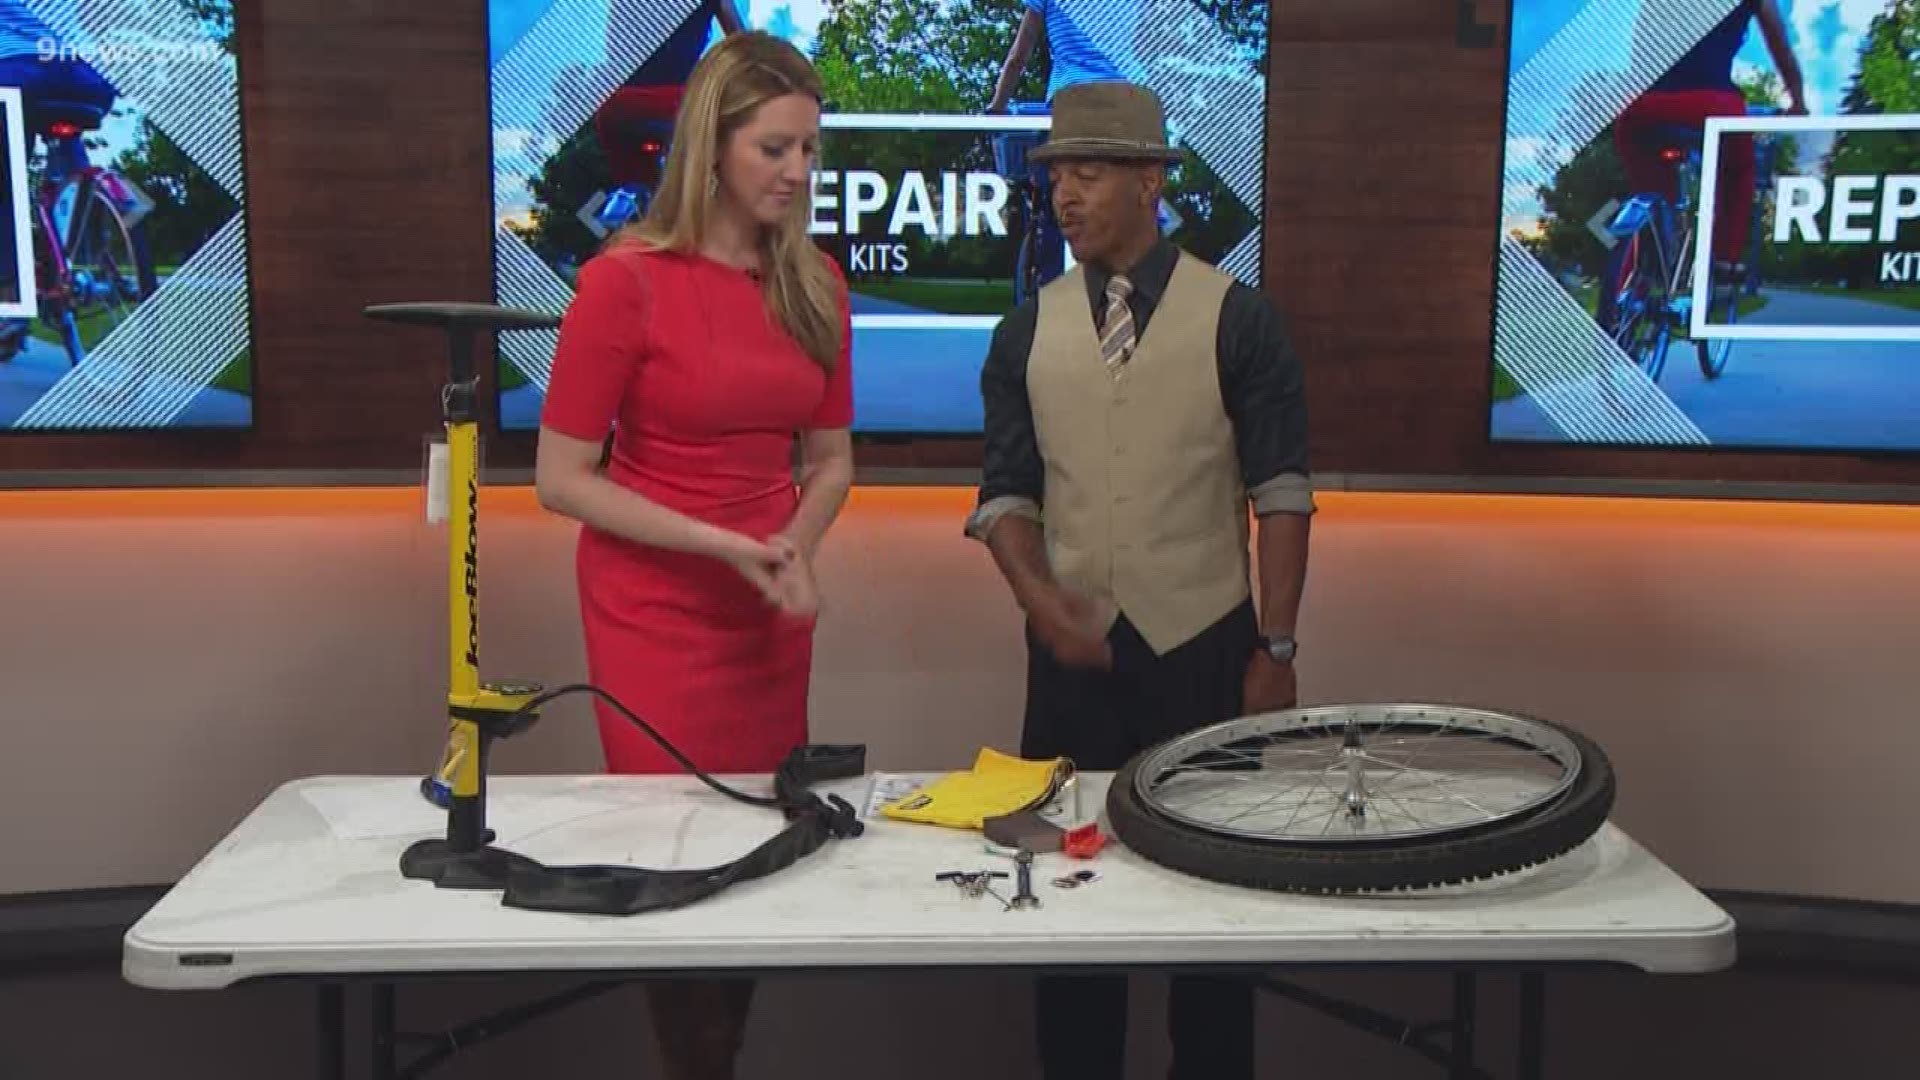 Each kit contains basic tools to repair tires or make adjustments to your ride.